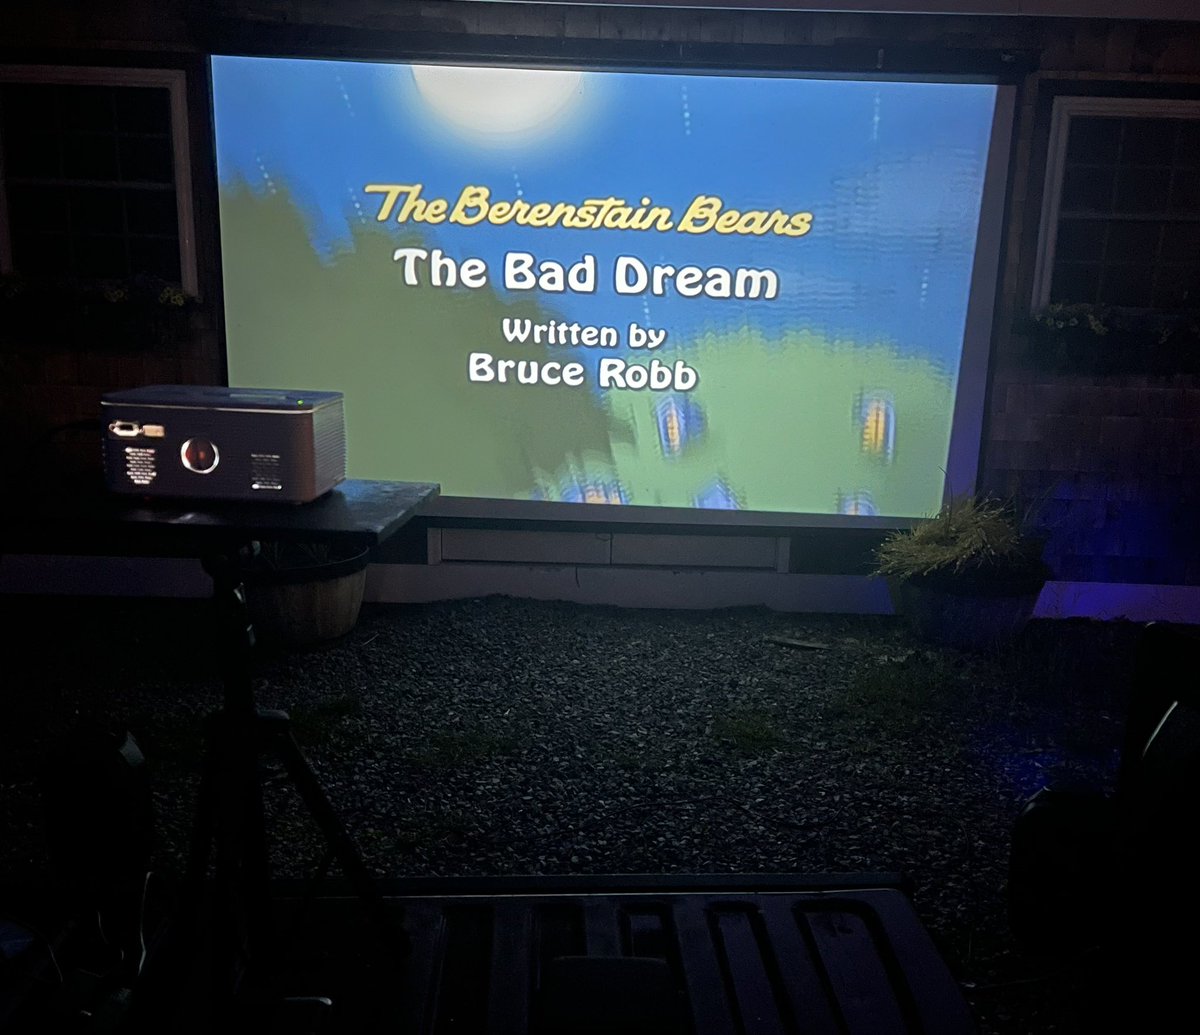 Opening weekend at our home Drive In Theater. How about some Berenstain Bears in “The Bad Dream”…